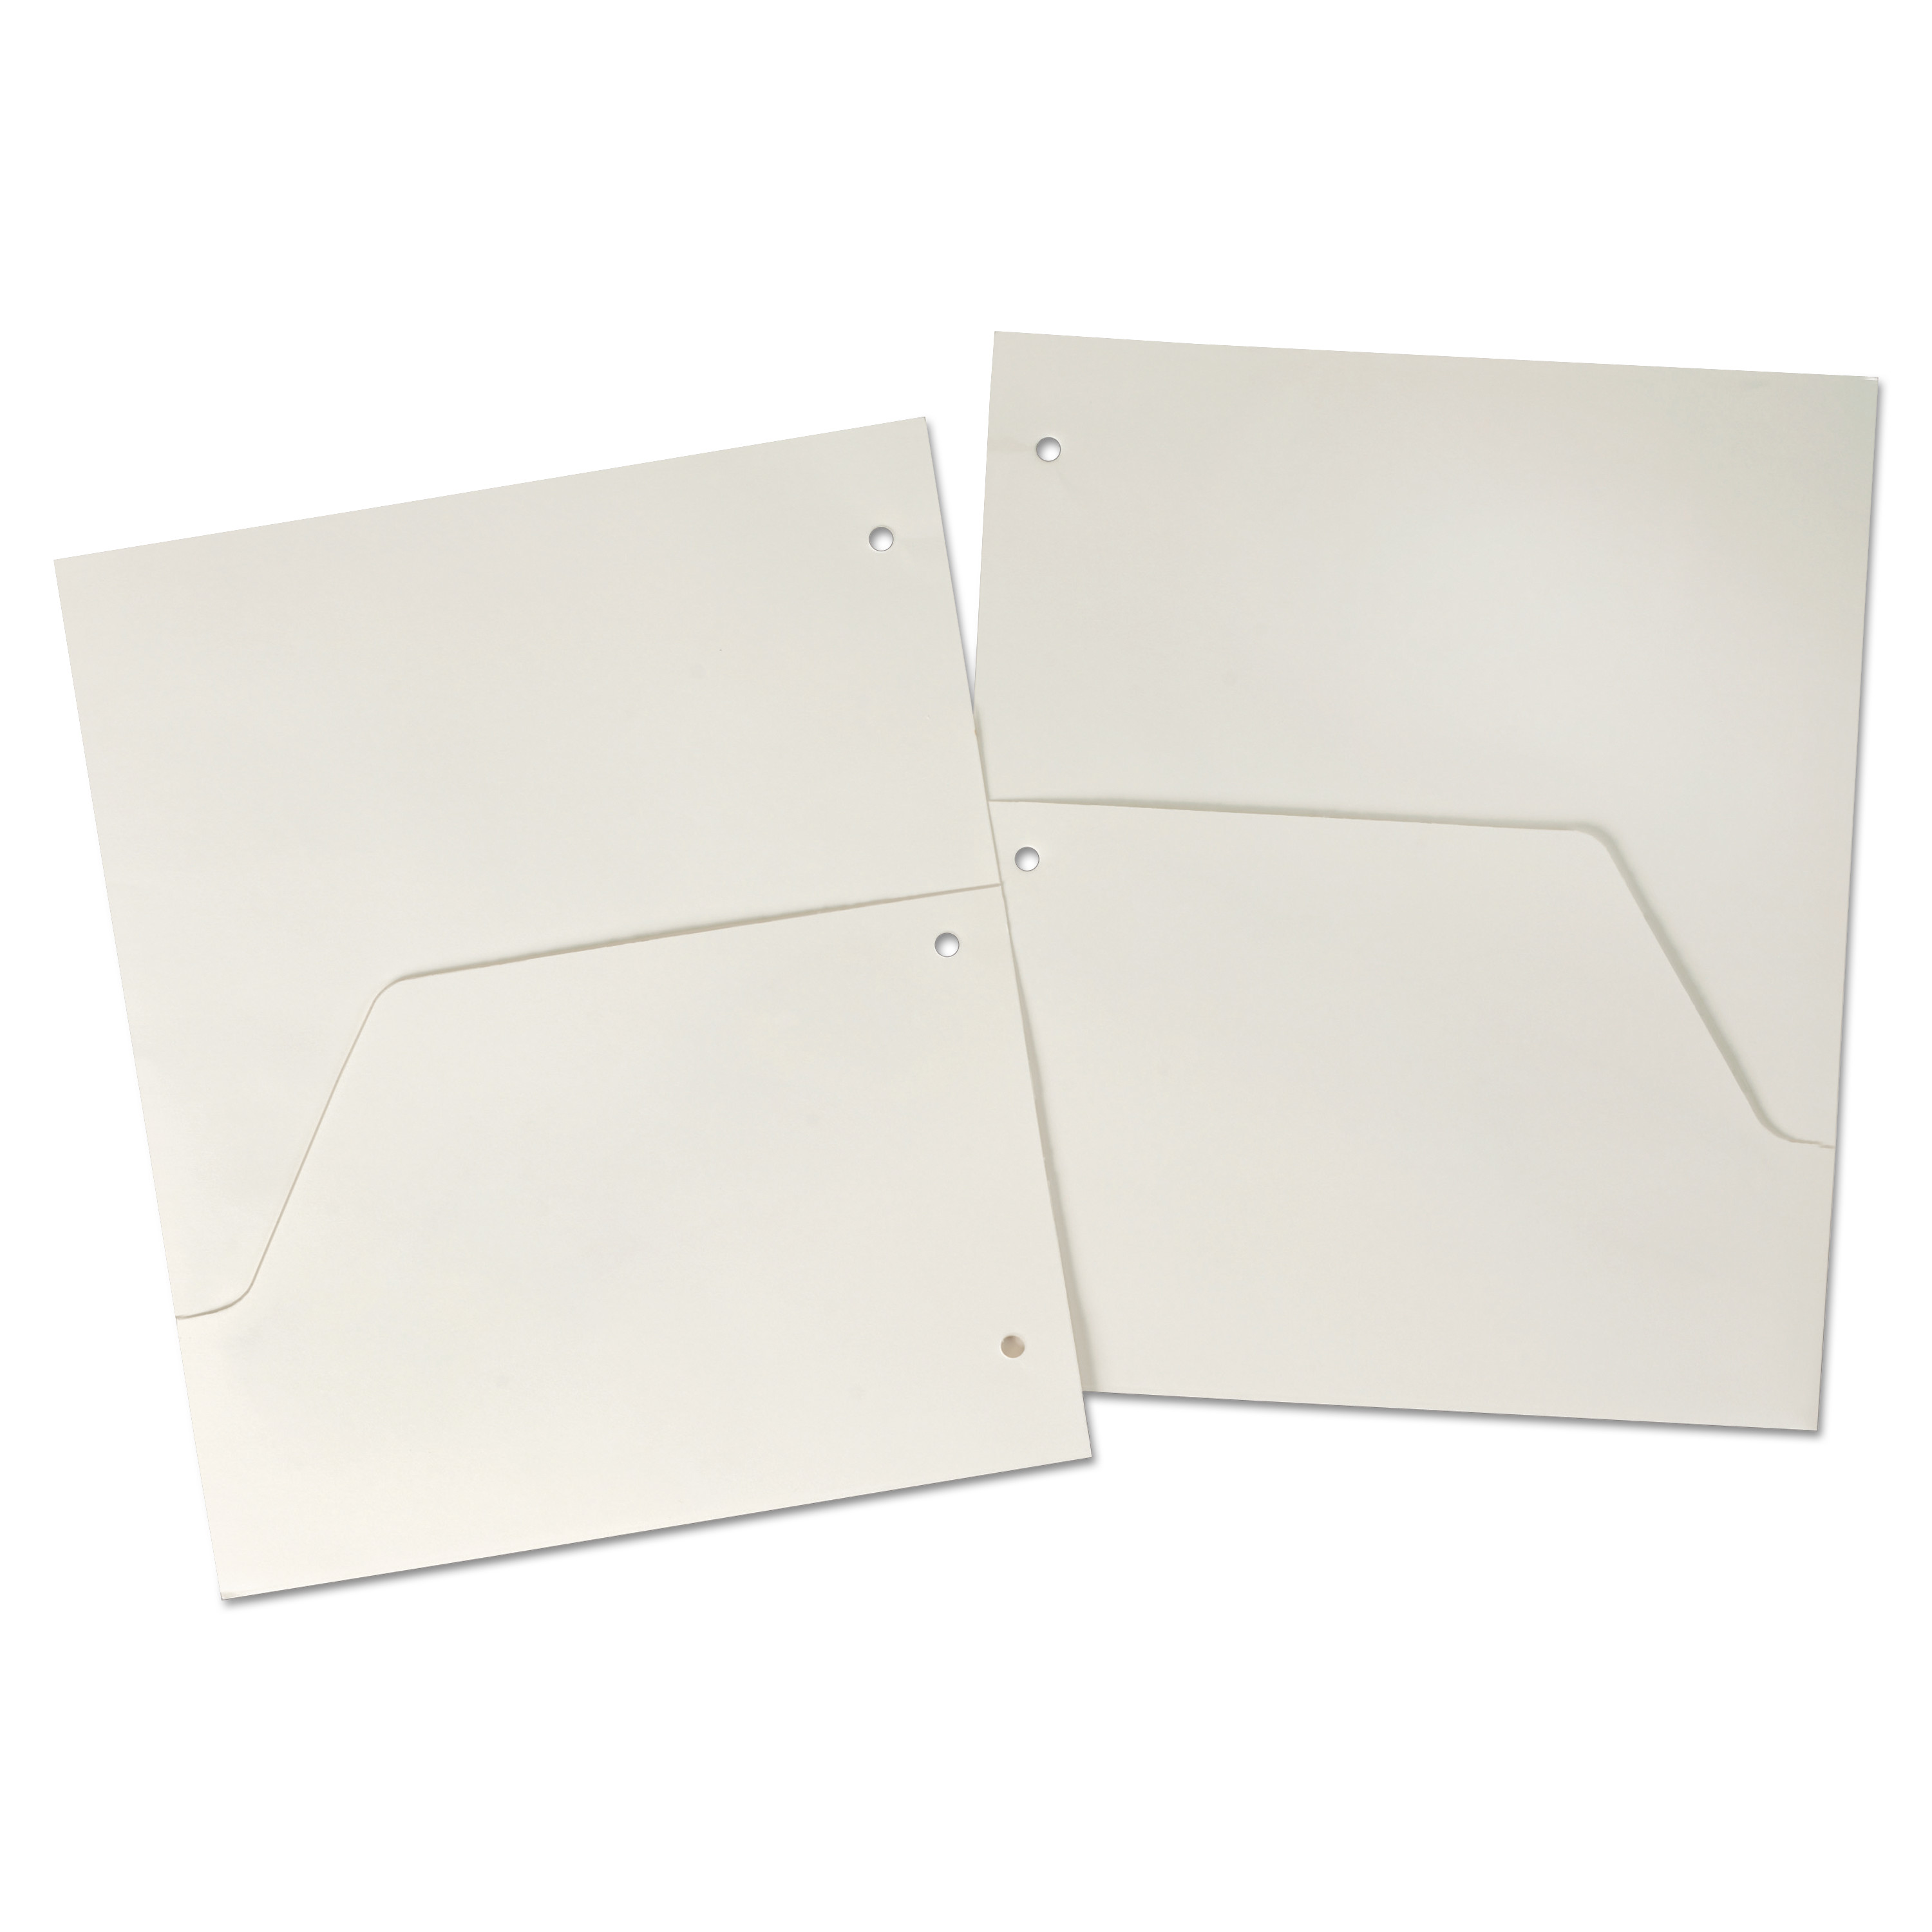  Cardinal 60155 Double Pocket Dividers for Ring Binders, 11 x 8.5, White, 5/Pack (CRD60155) 